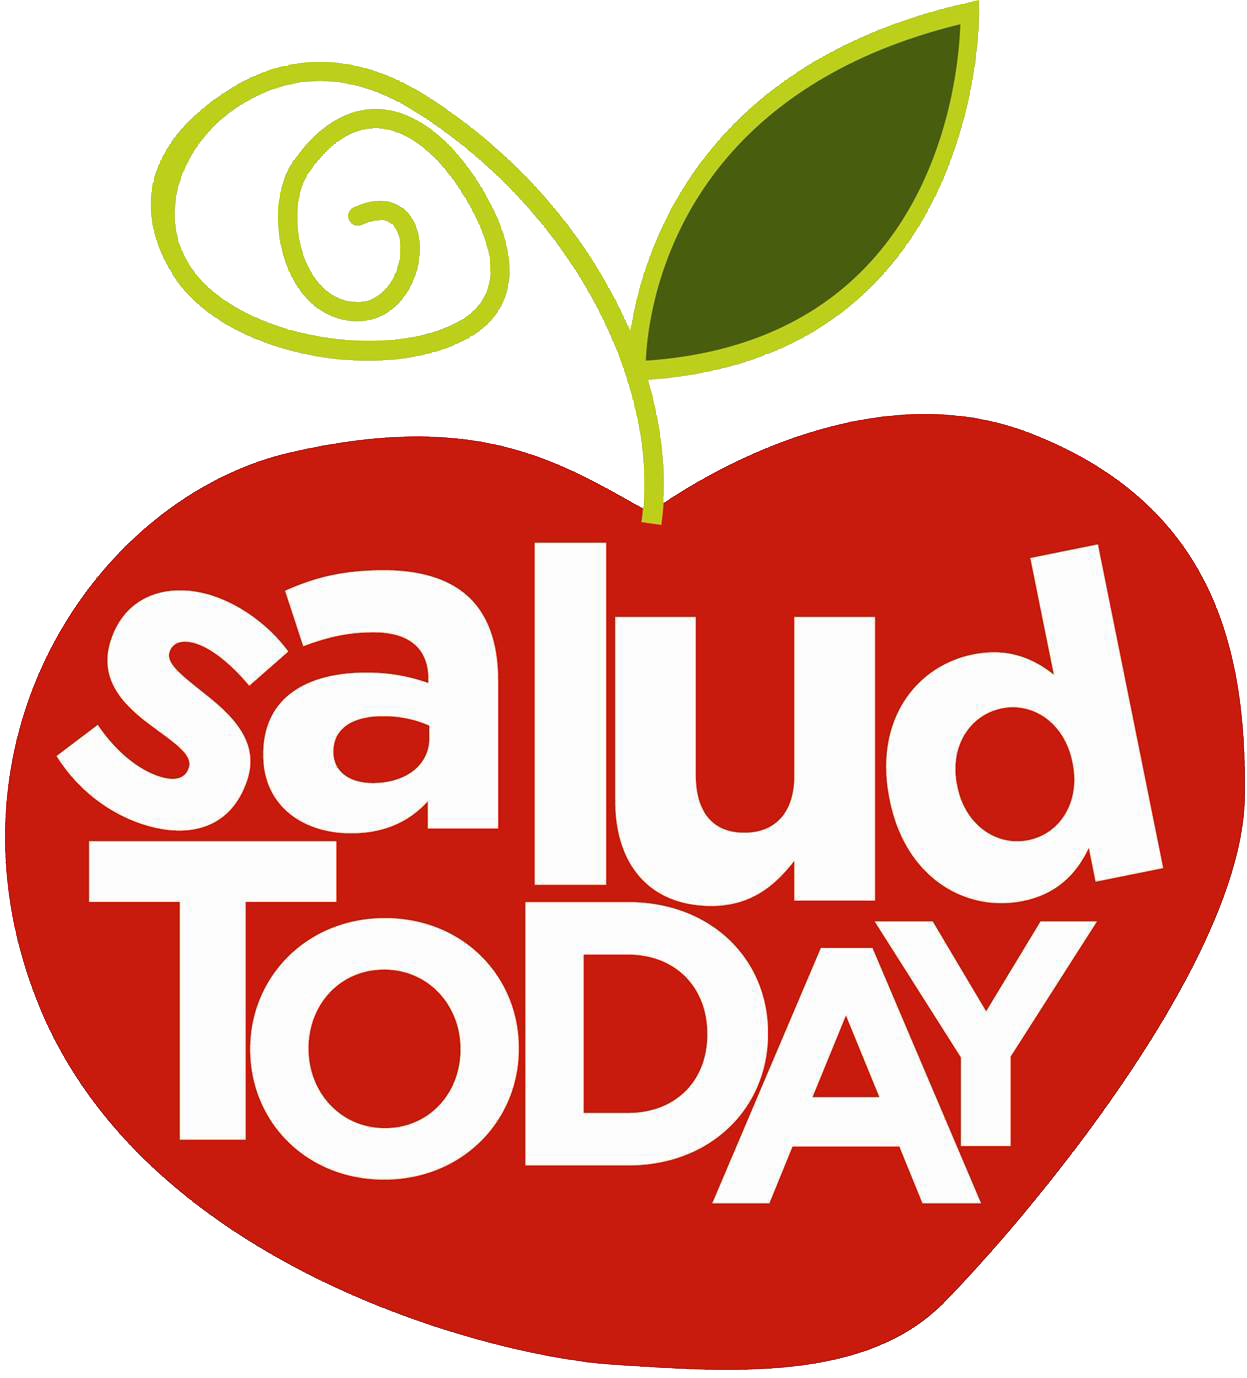 Clipart exercise healthy lifestyle. Salud today hispanics cite